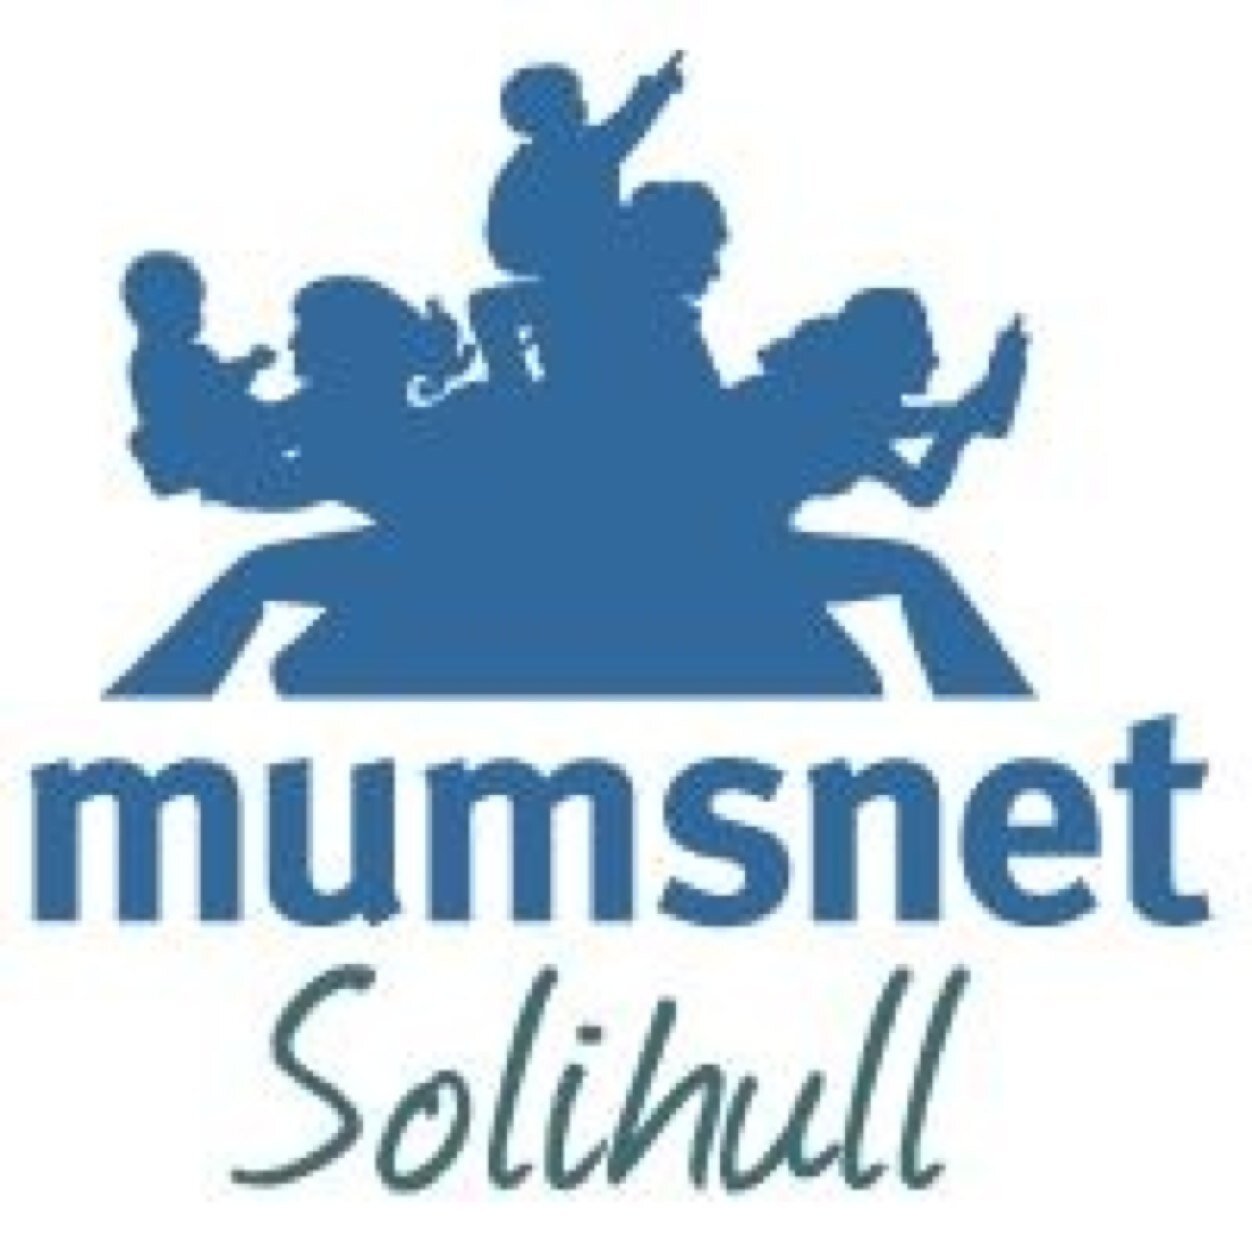 Follow for news and events in Solihull. Brought to you by the lovely people at Mumsnet (@mumsnettowers)